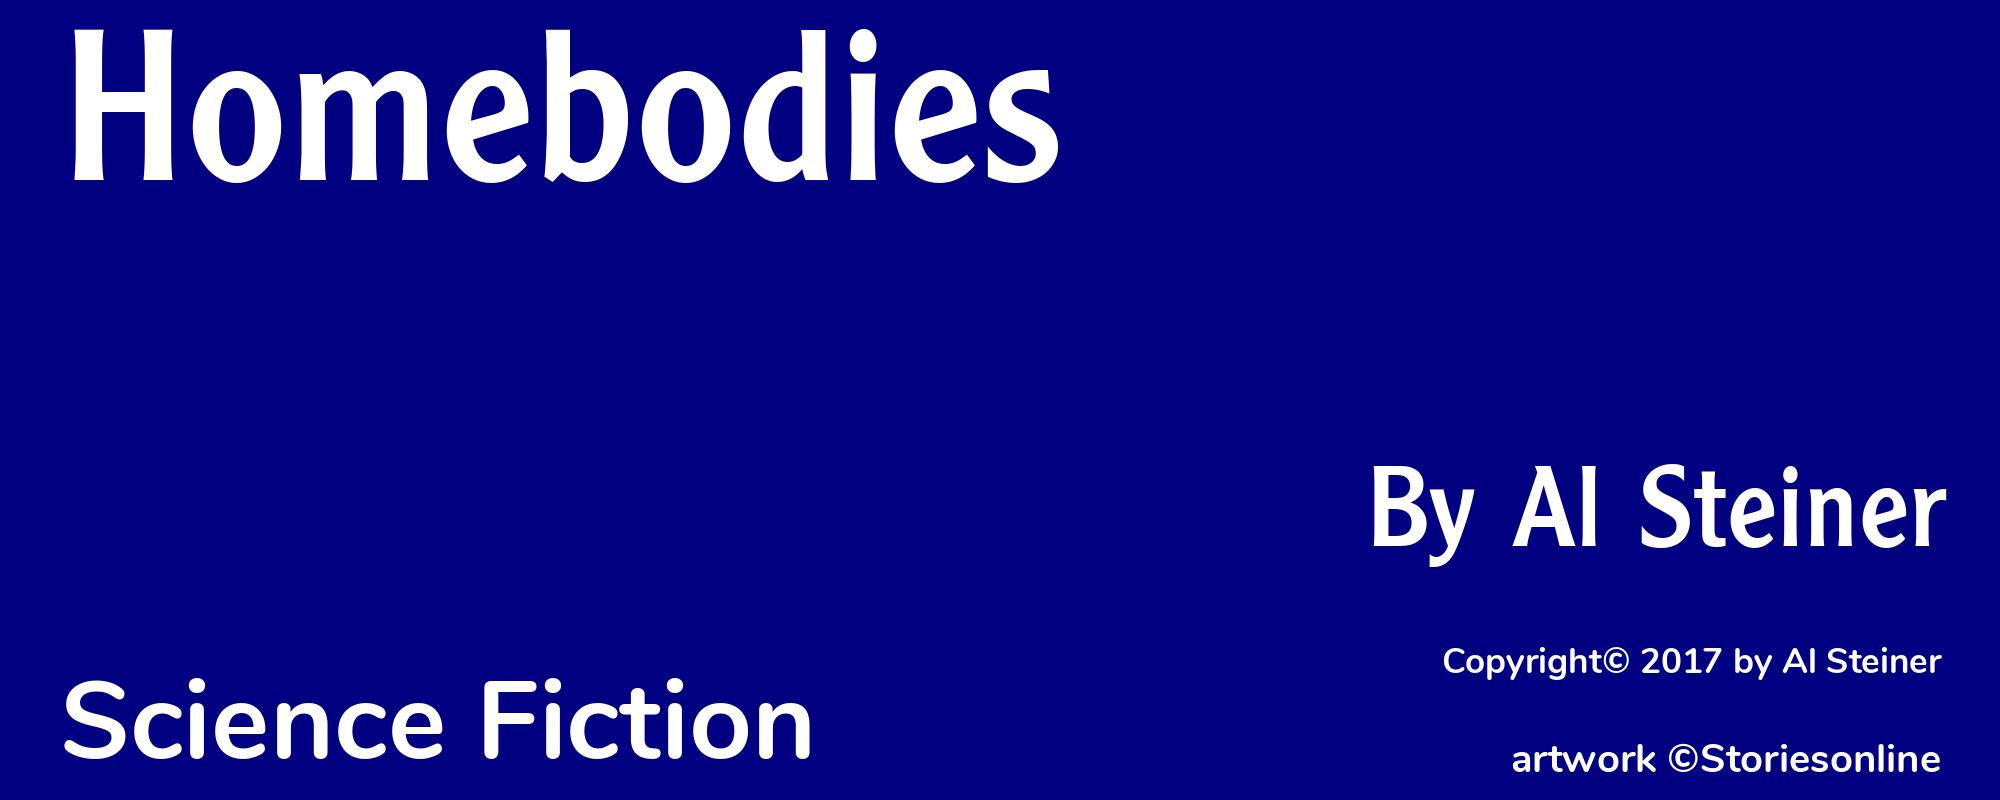 Homebodies - Cover